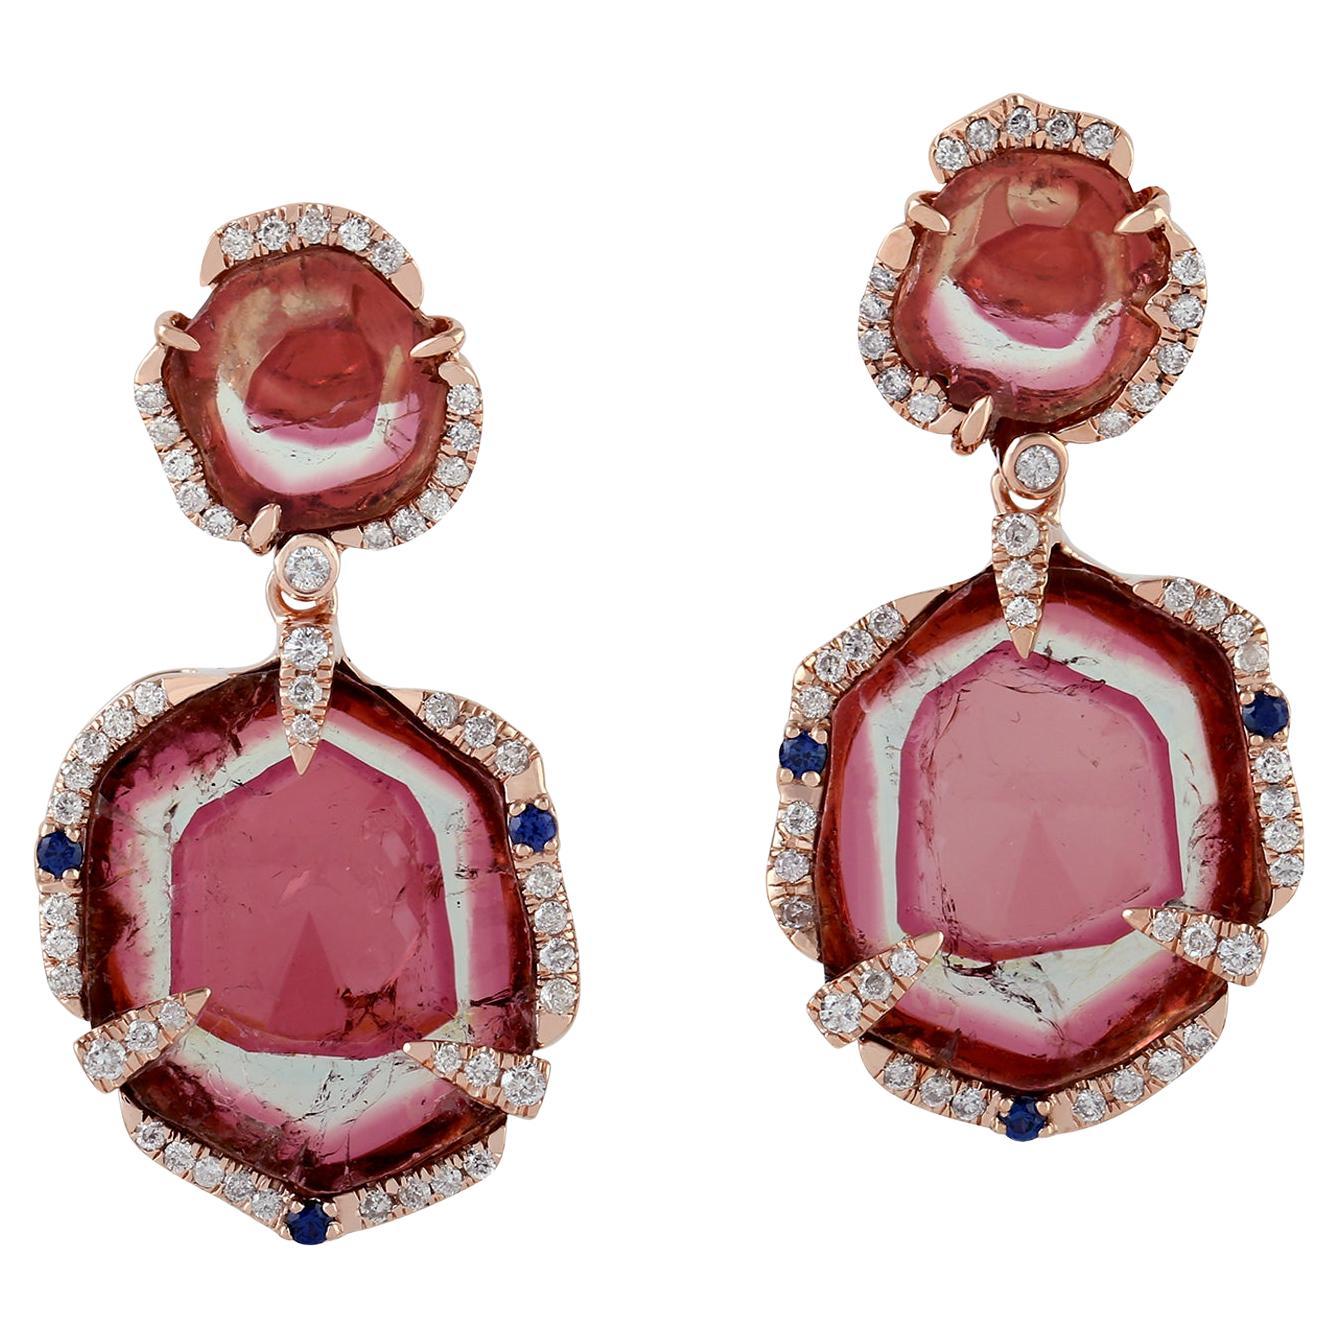 Uneven Shaped Watermelon Tourmaline Earrings With Blue Sapphire & Diamonds For Sale